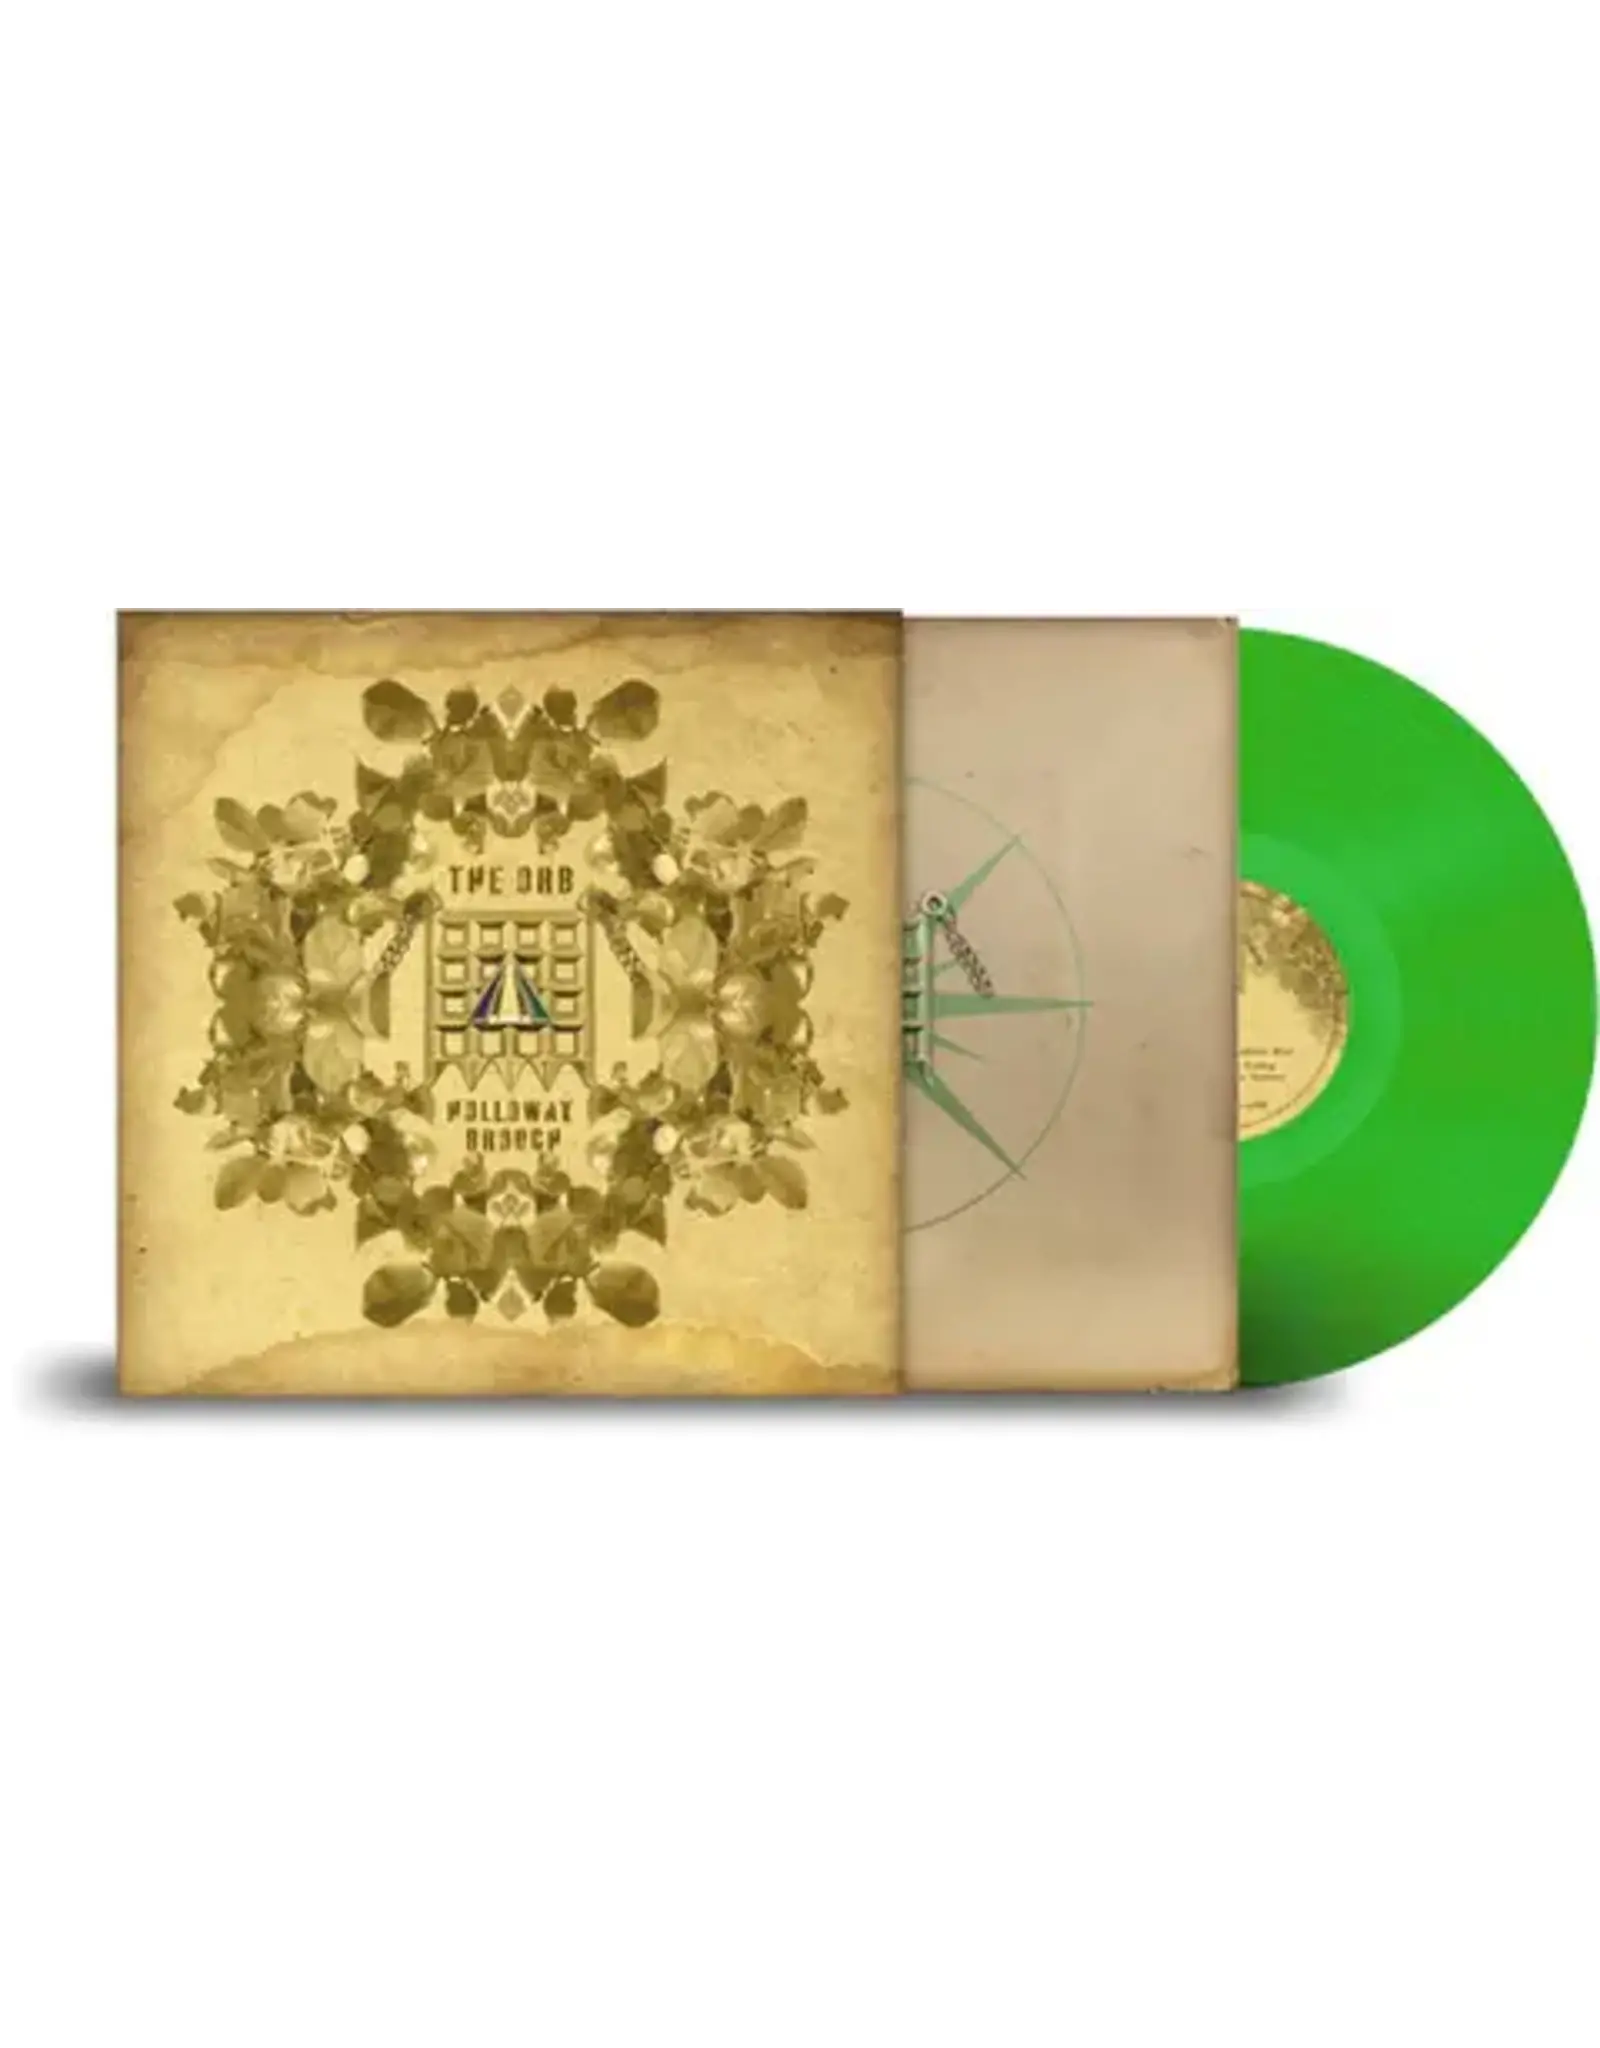 Orb - The Holloway Brooch (An Ambient Excursion Beyond The Orboretum) (Record Store Day) [Green Vinyl]